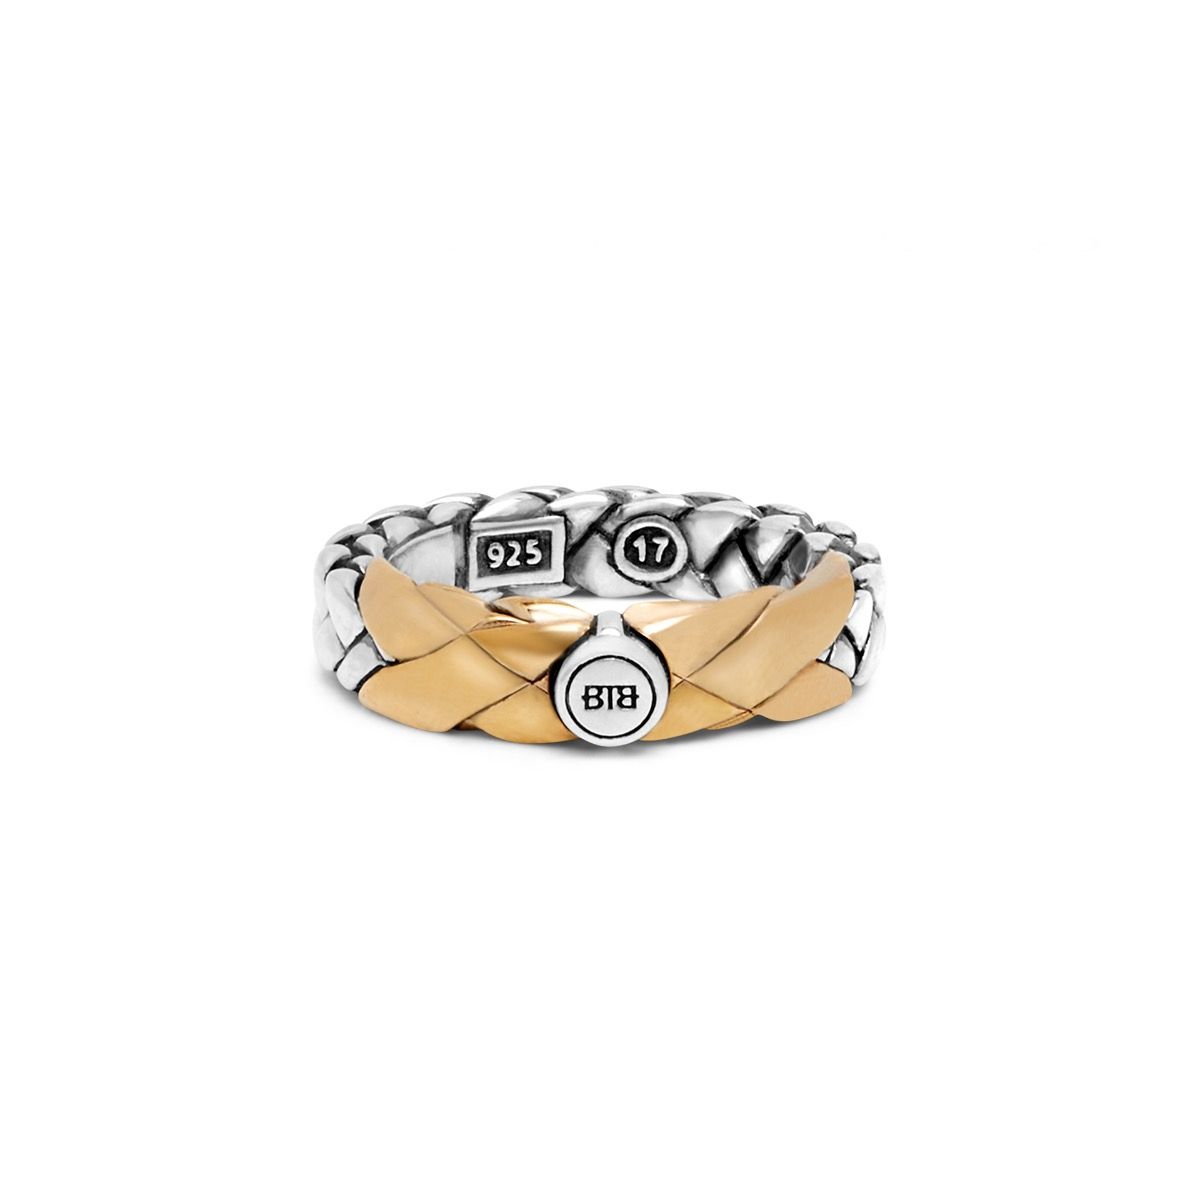 832 16 - George small Limited Ring silver/bronze